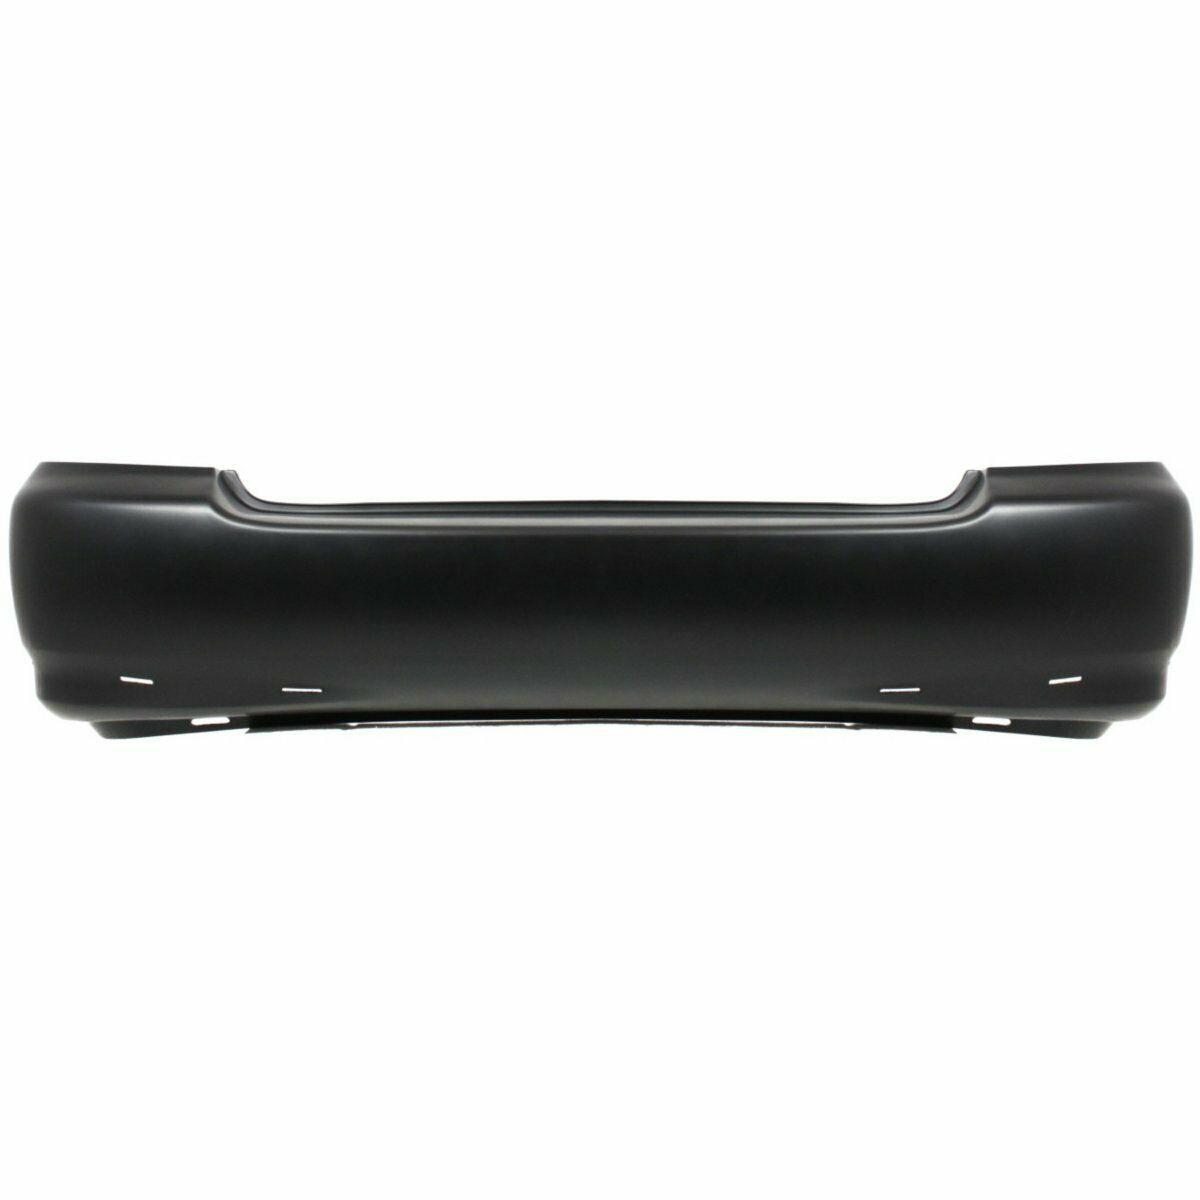 2003-2005 Toyota Corolla S Rear Bumper Painted to Match